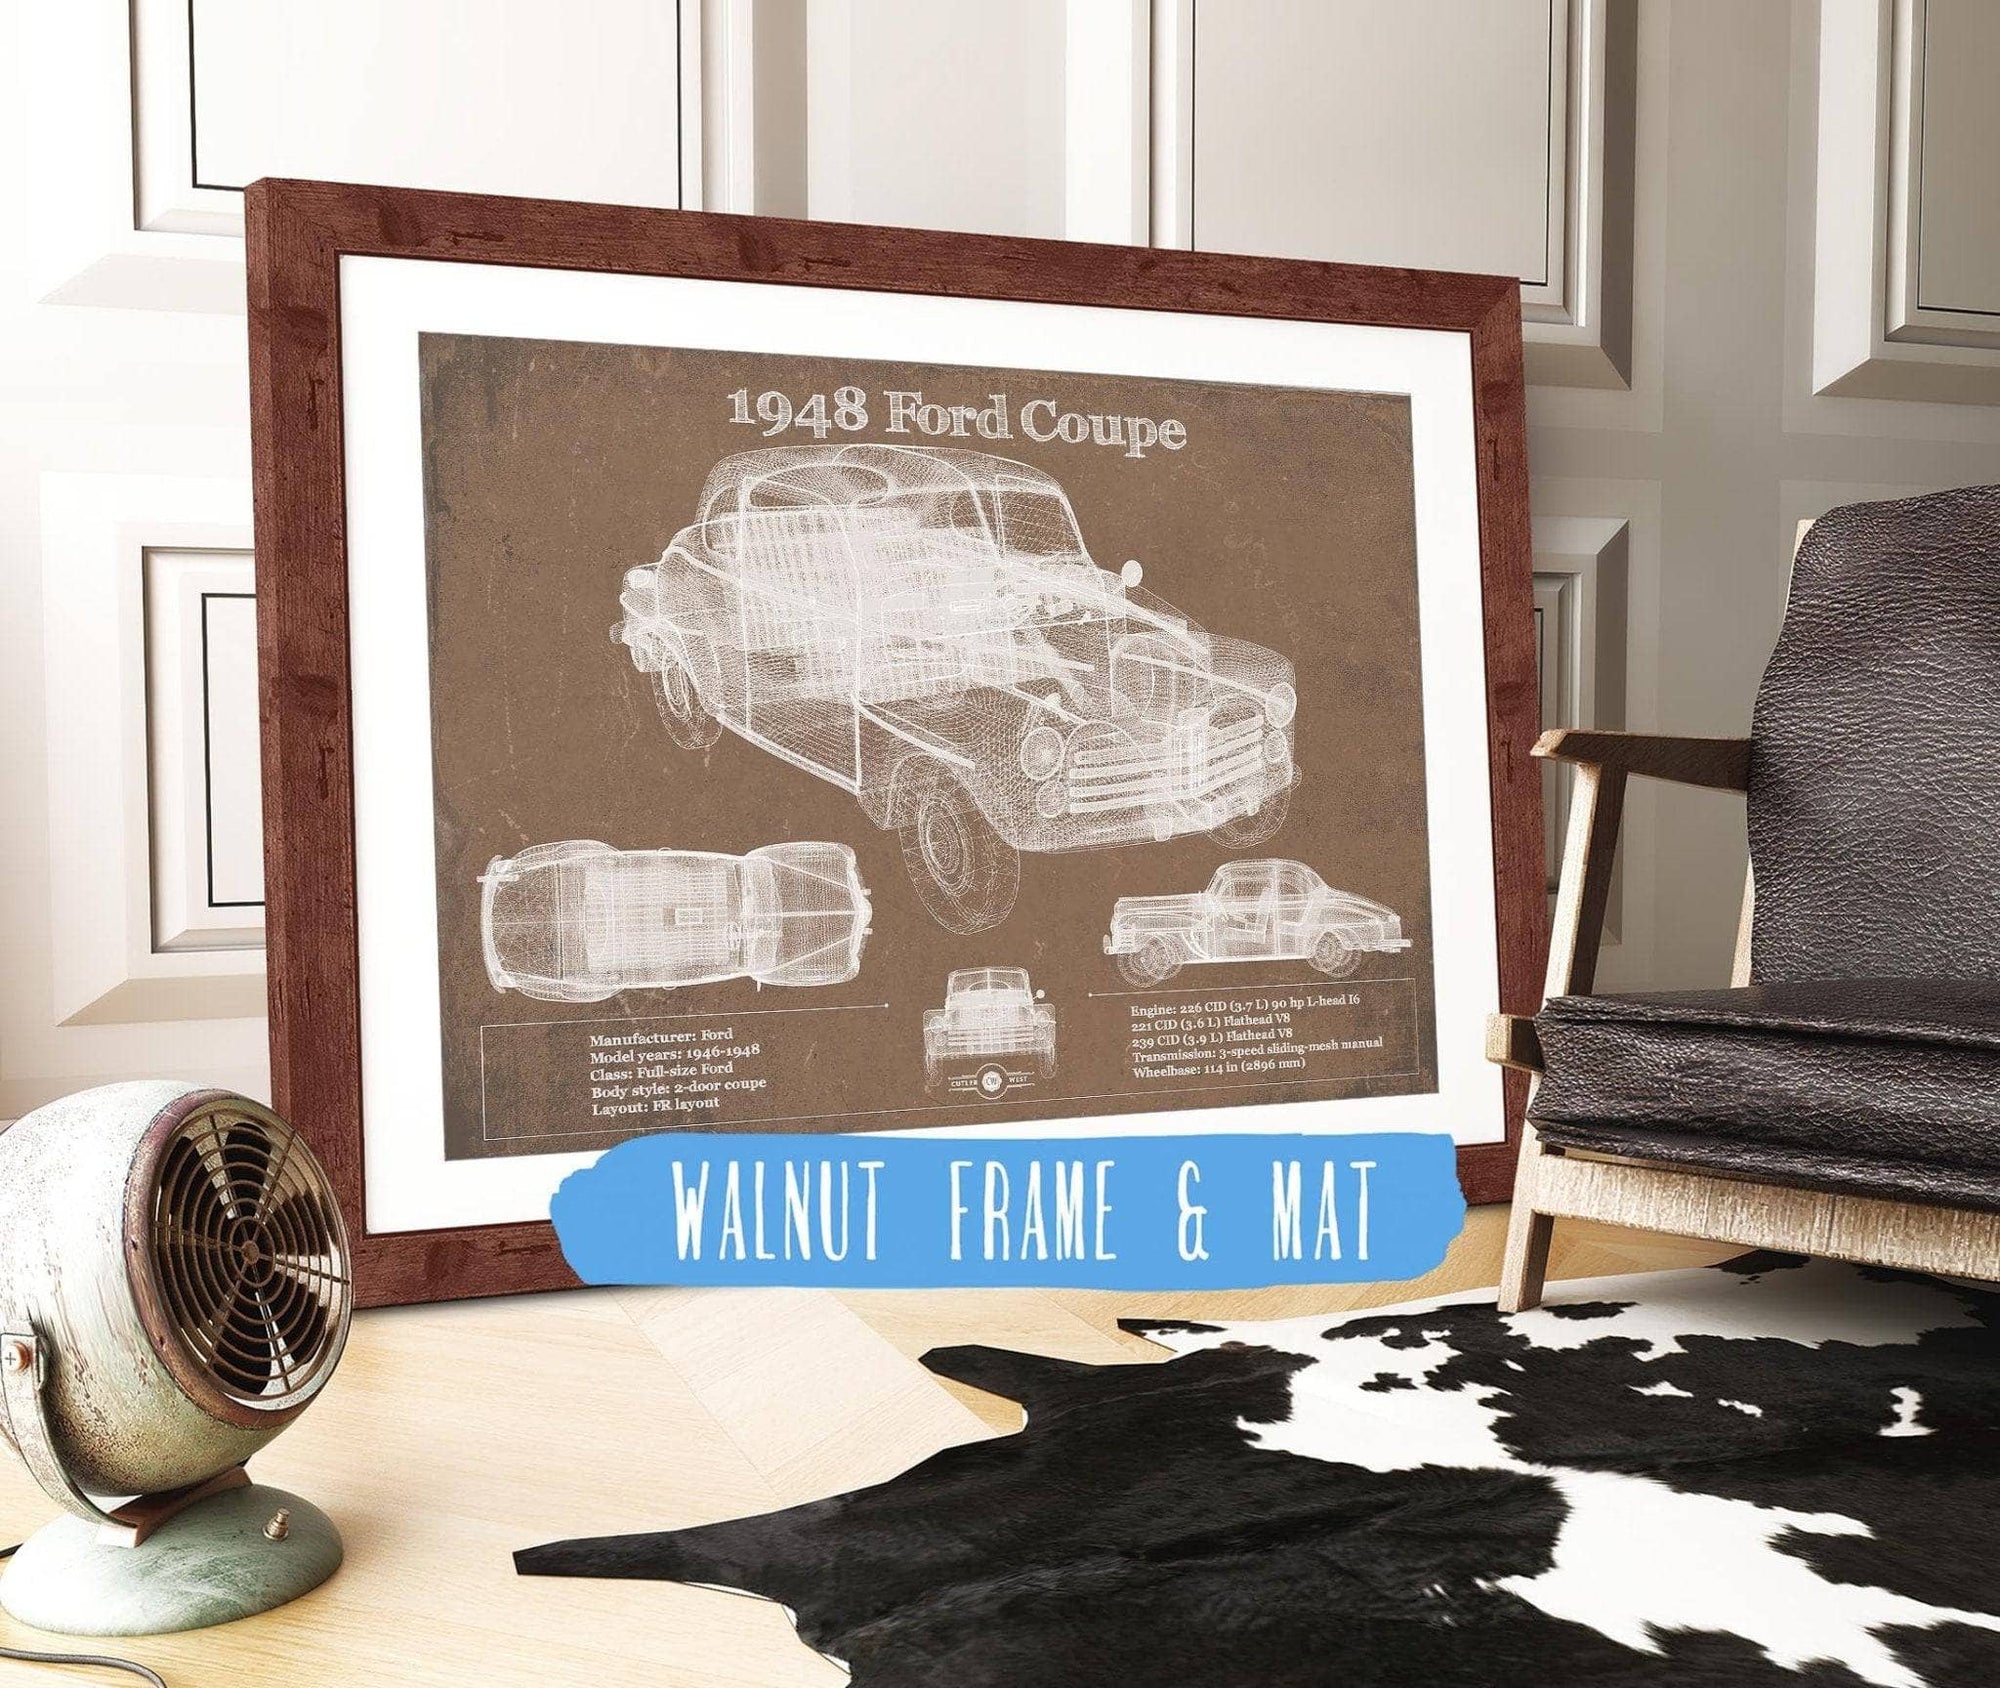 Cutler West Ford Collection 14" x 11" / Walnut Frame & Mat 1948 Ford Coupe Vintage Blueprint Auto Print 235353061